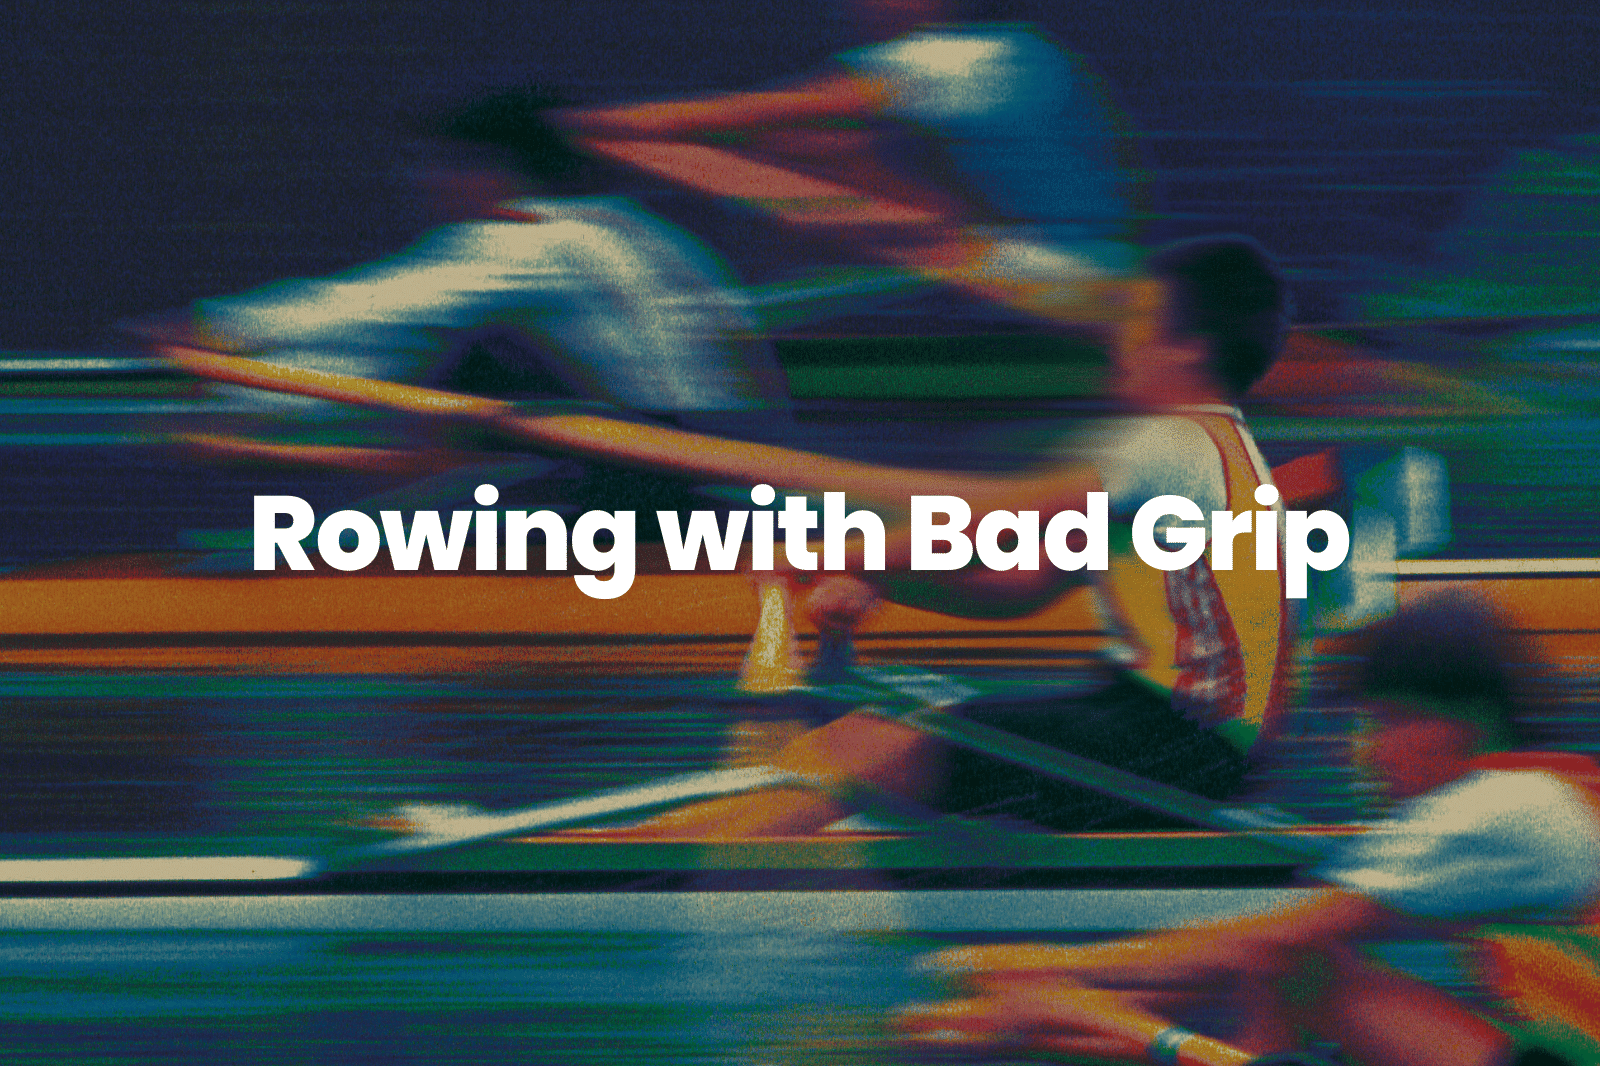 Rowing with Bad Grip